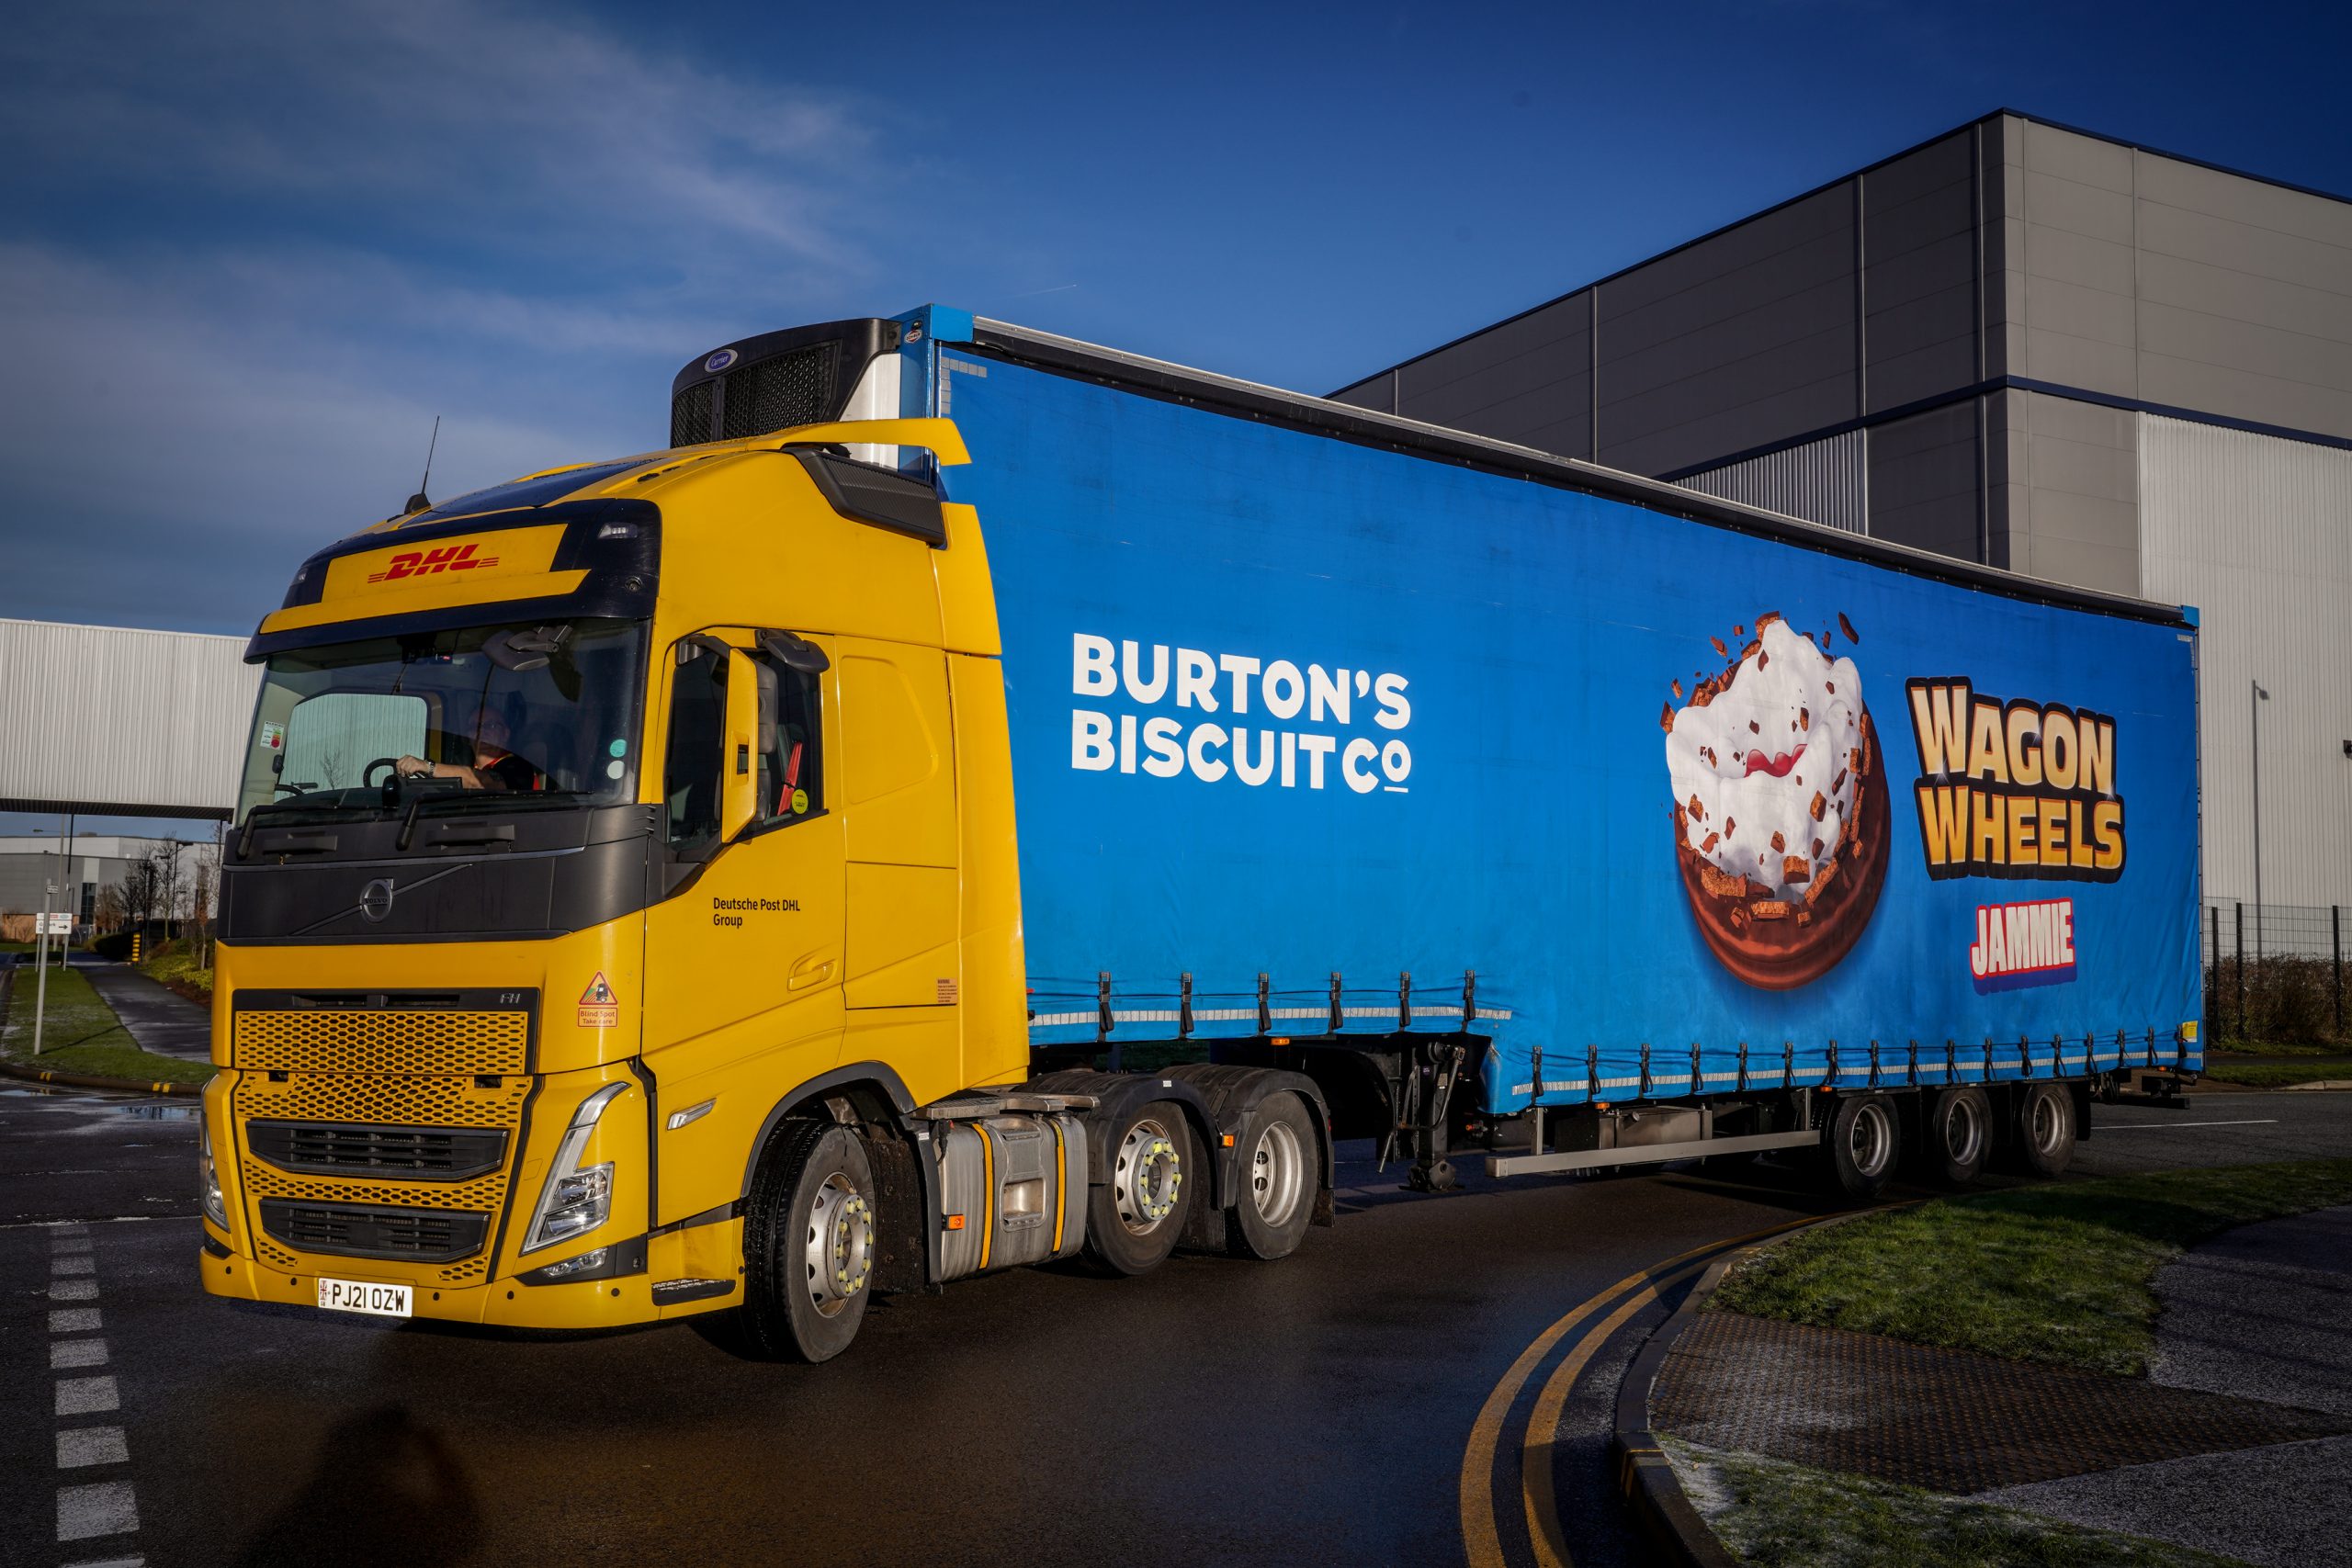 DHL Supply Chain invests in new trailers for Burton’s Biscuits